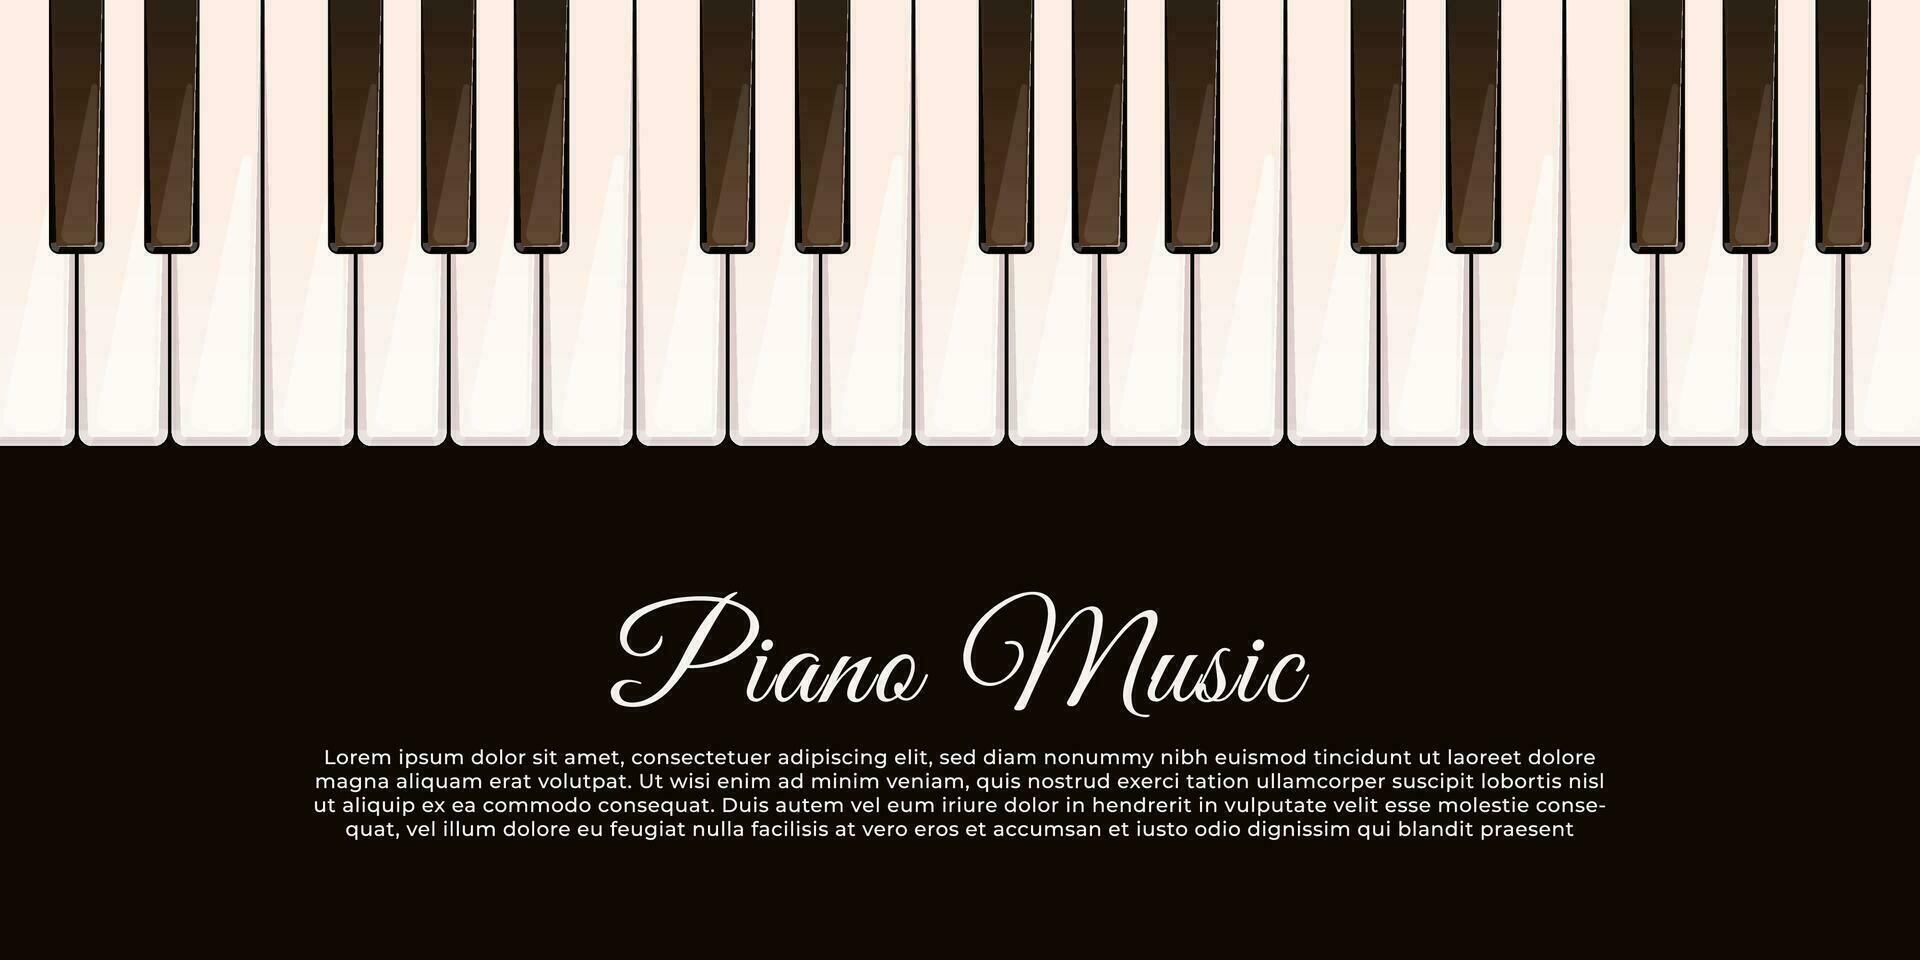 Music background with piano keys illustration. vector